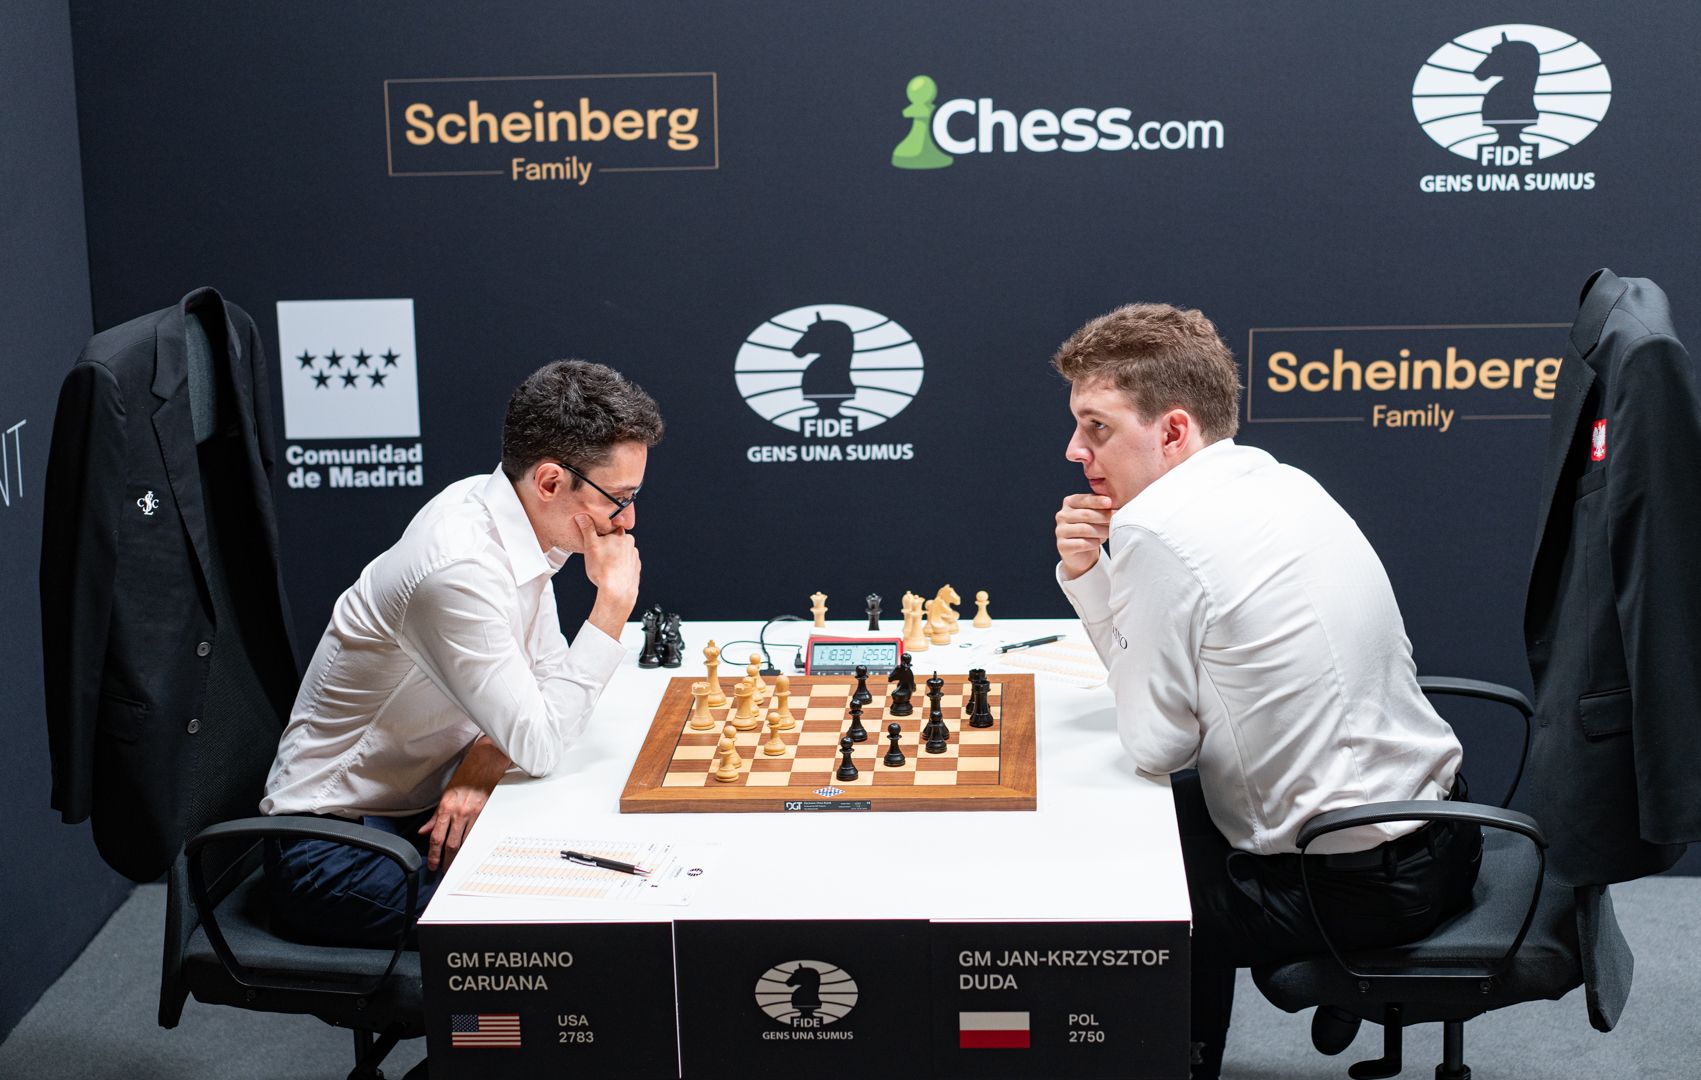 Today in Chess, FIDE Candidates Round 3 Recap